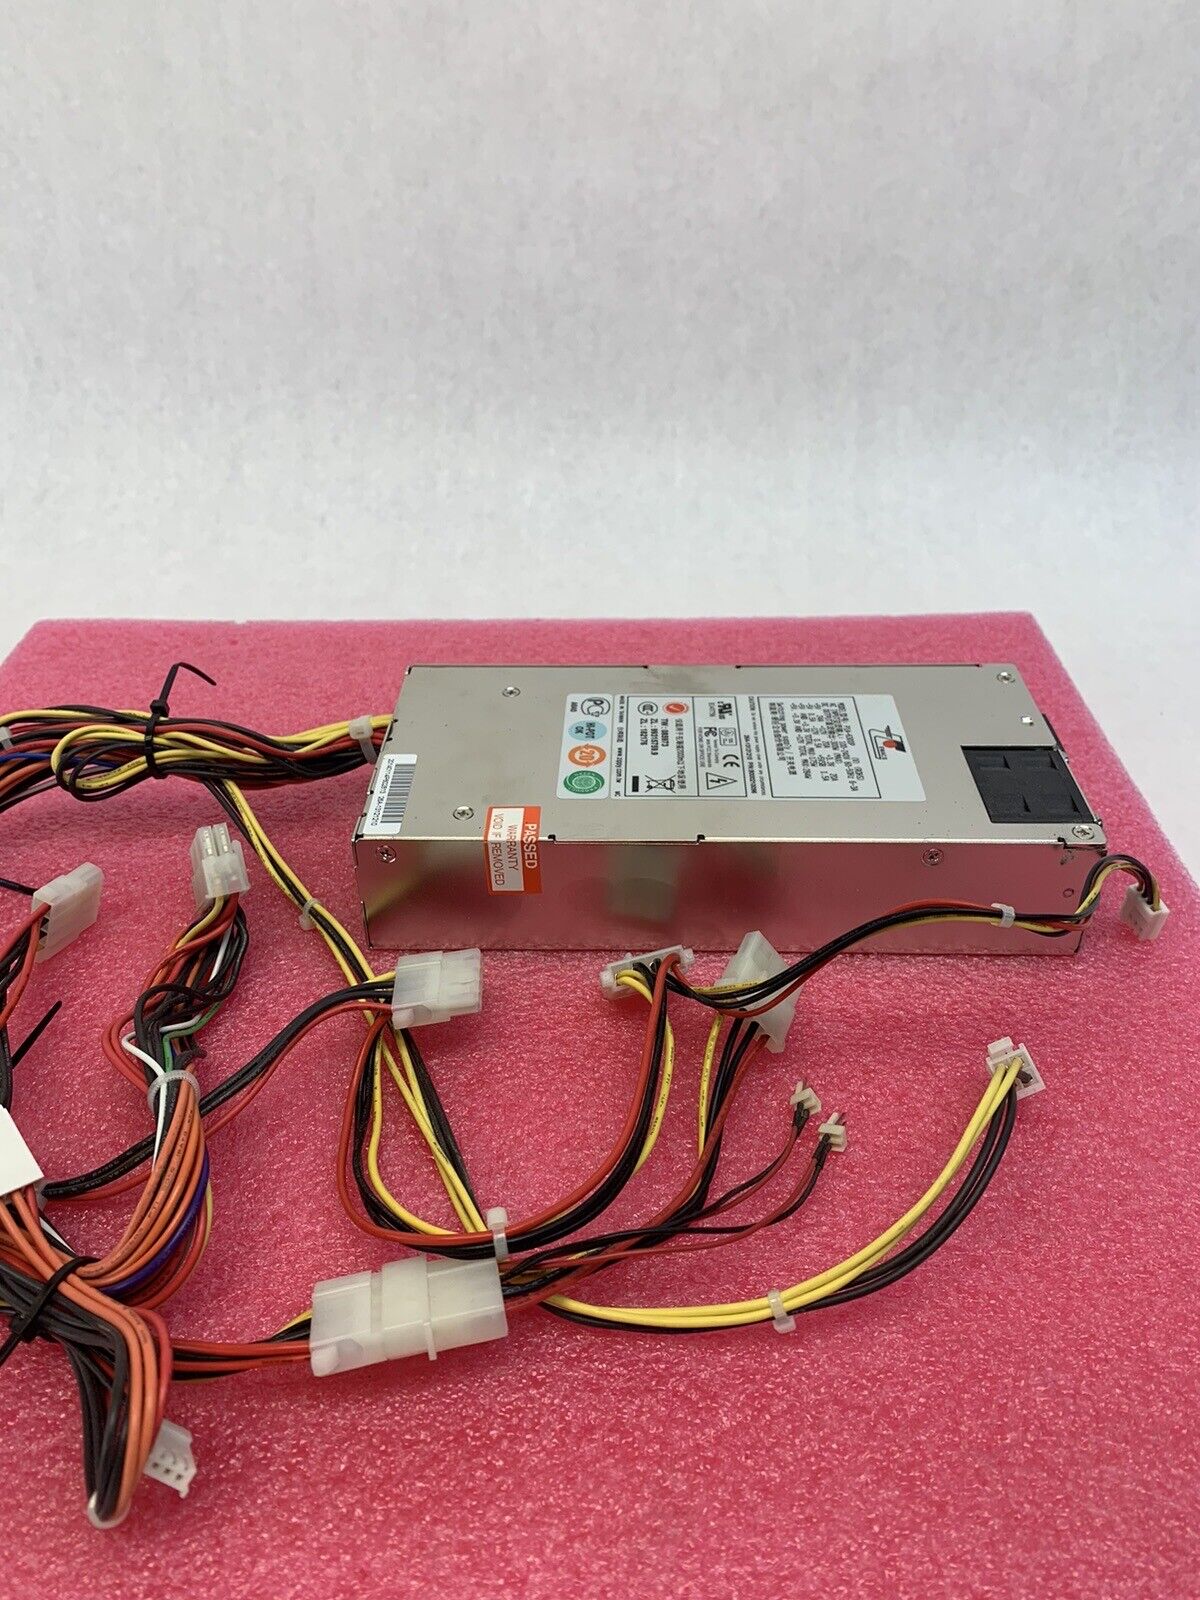 EMACS P1A-6300P 284W Power Supply